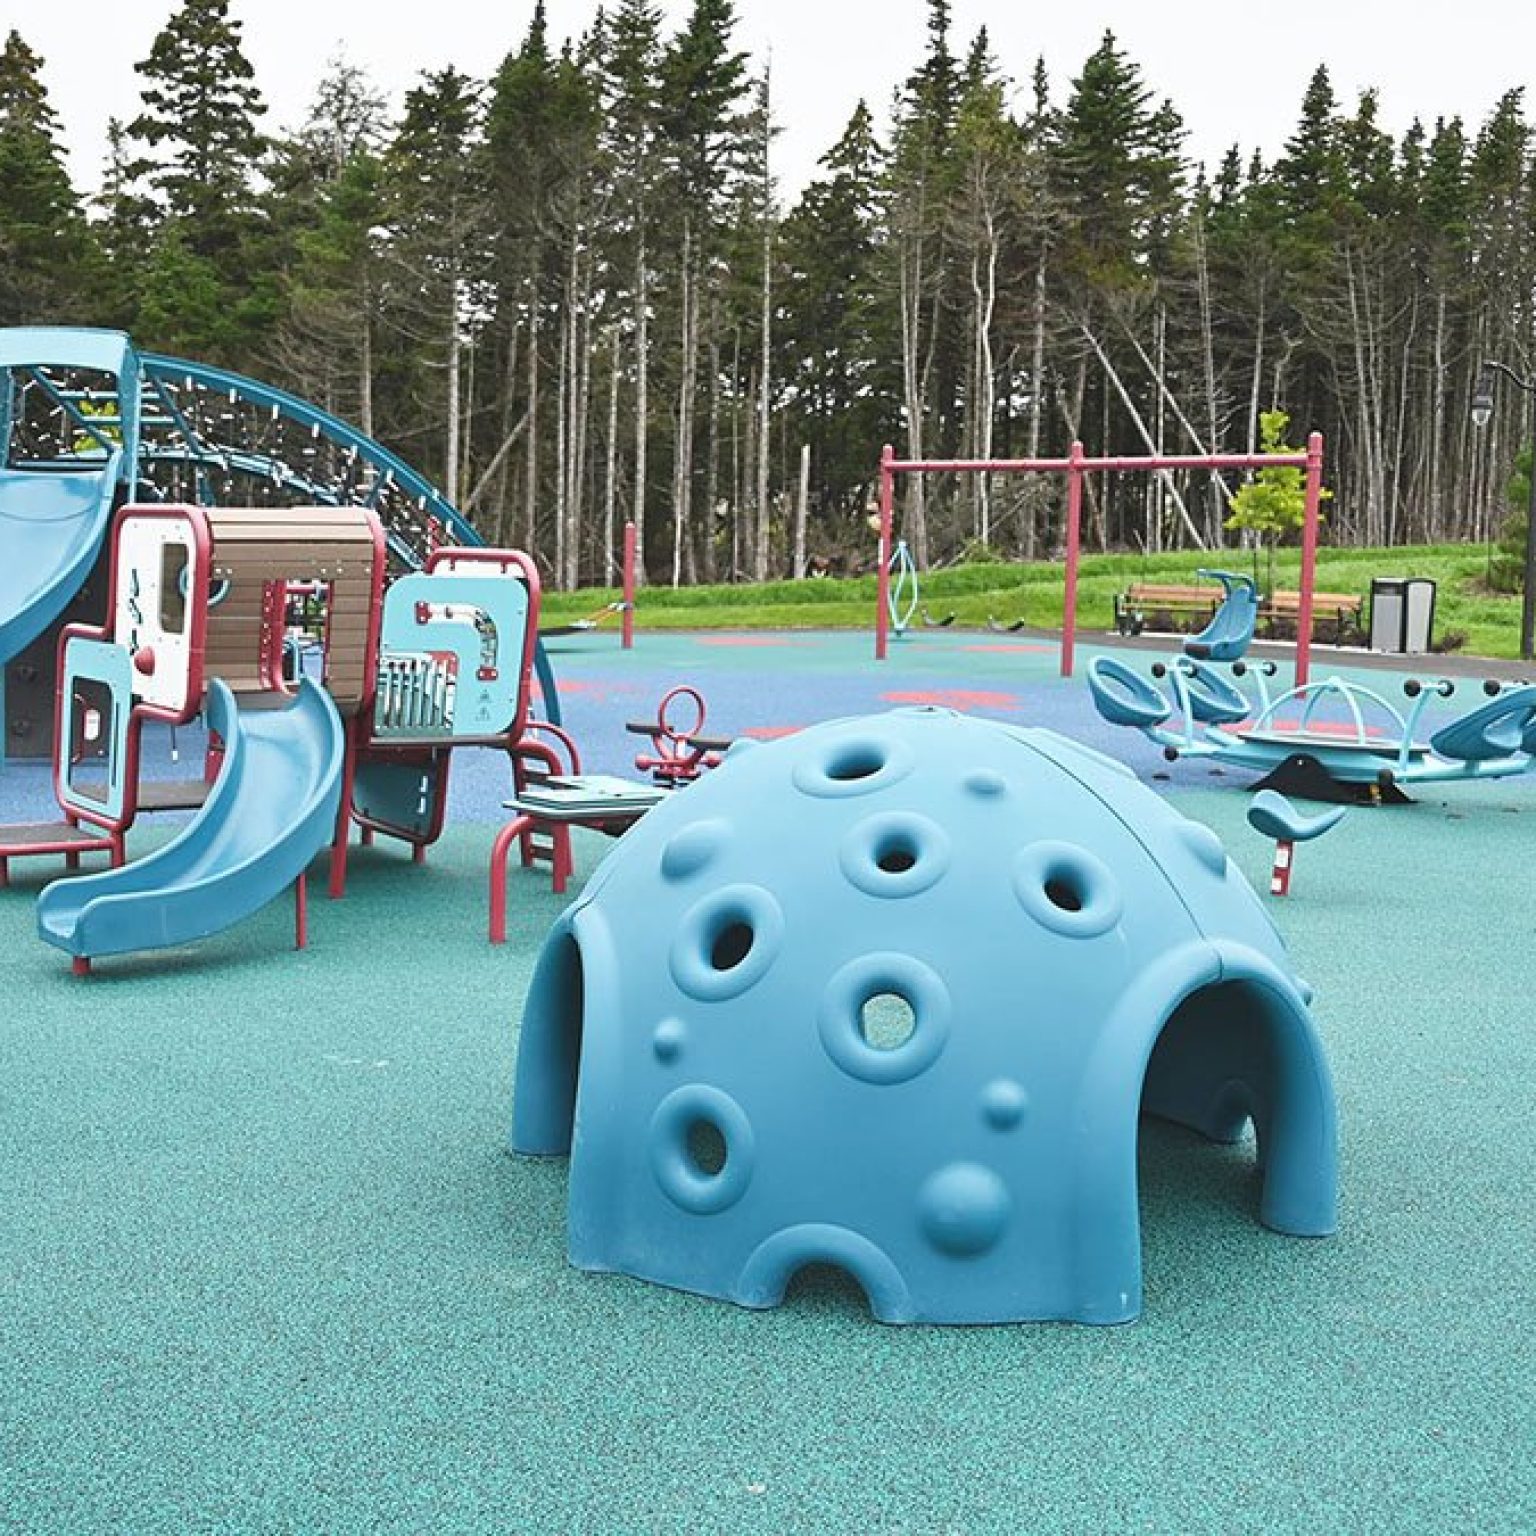 City of St. John’s Officially Opens Galway Village Green Playground